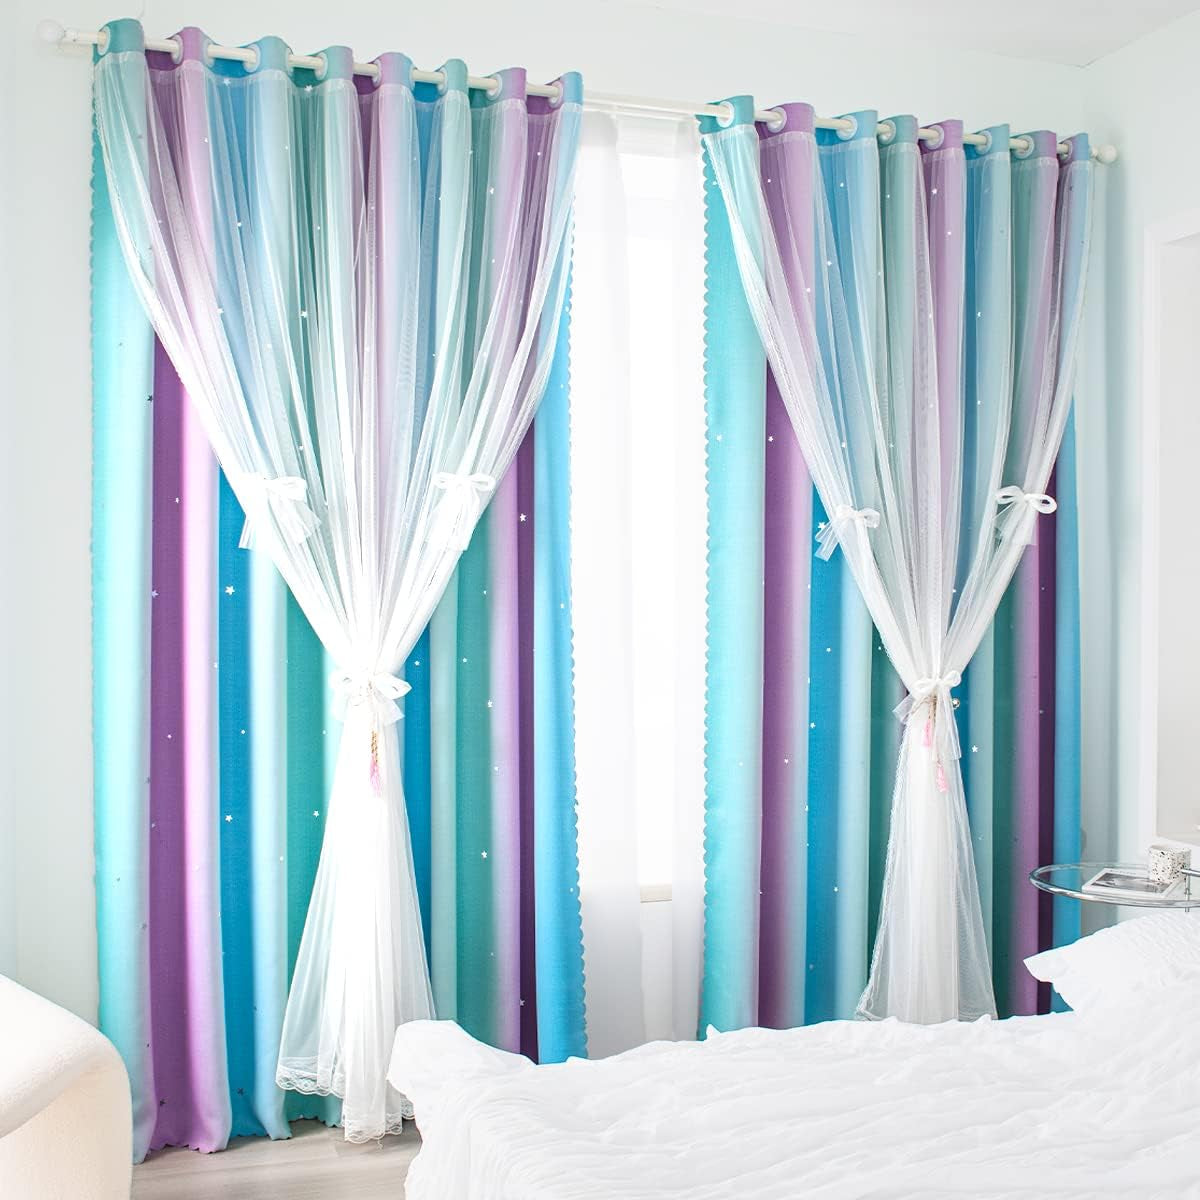 Yancorp Curtains for Girls Bedroom Kids Room Curtain Colorful Window Nursery Curtain 63 Inches Length Room Darkening Grommet 2 Layers (Pink Purple, W52 X L63)  Yancorp Purple Teal Blue W52" X L72" 